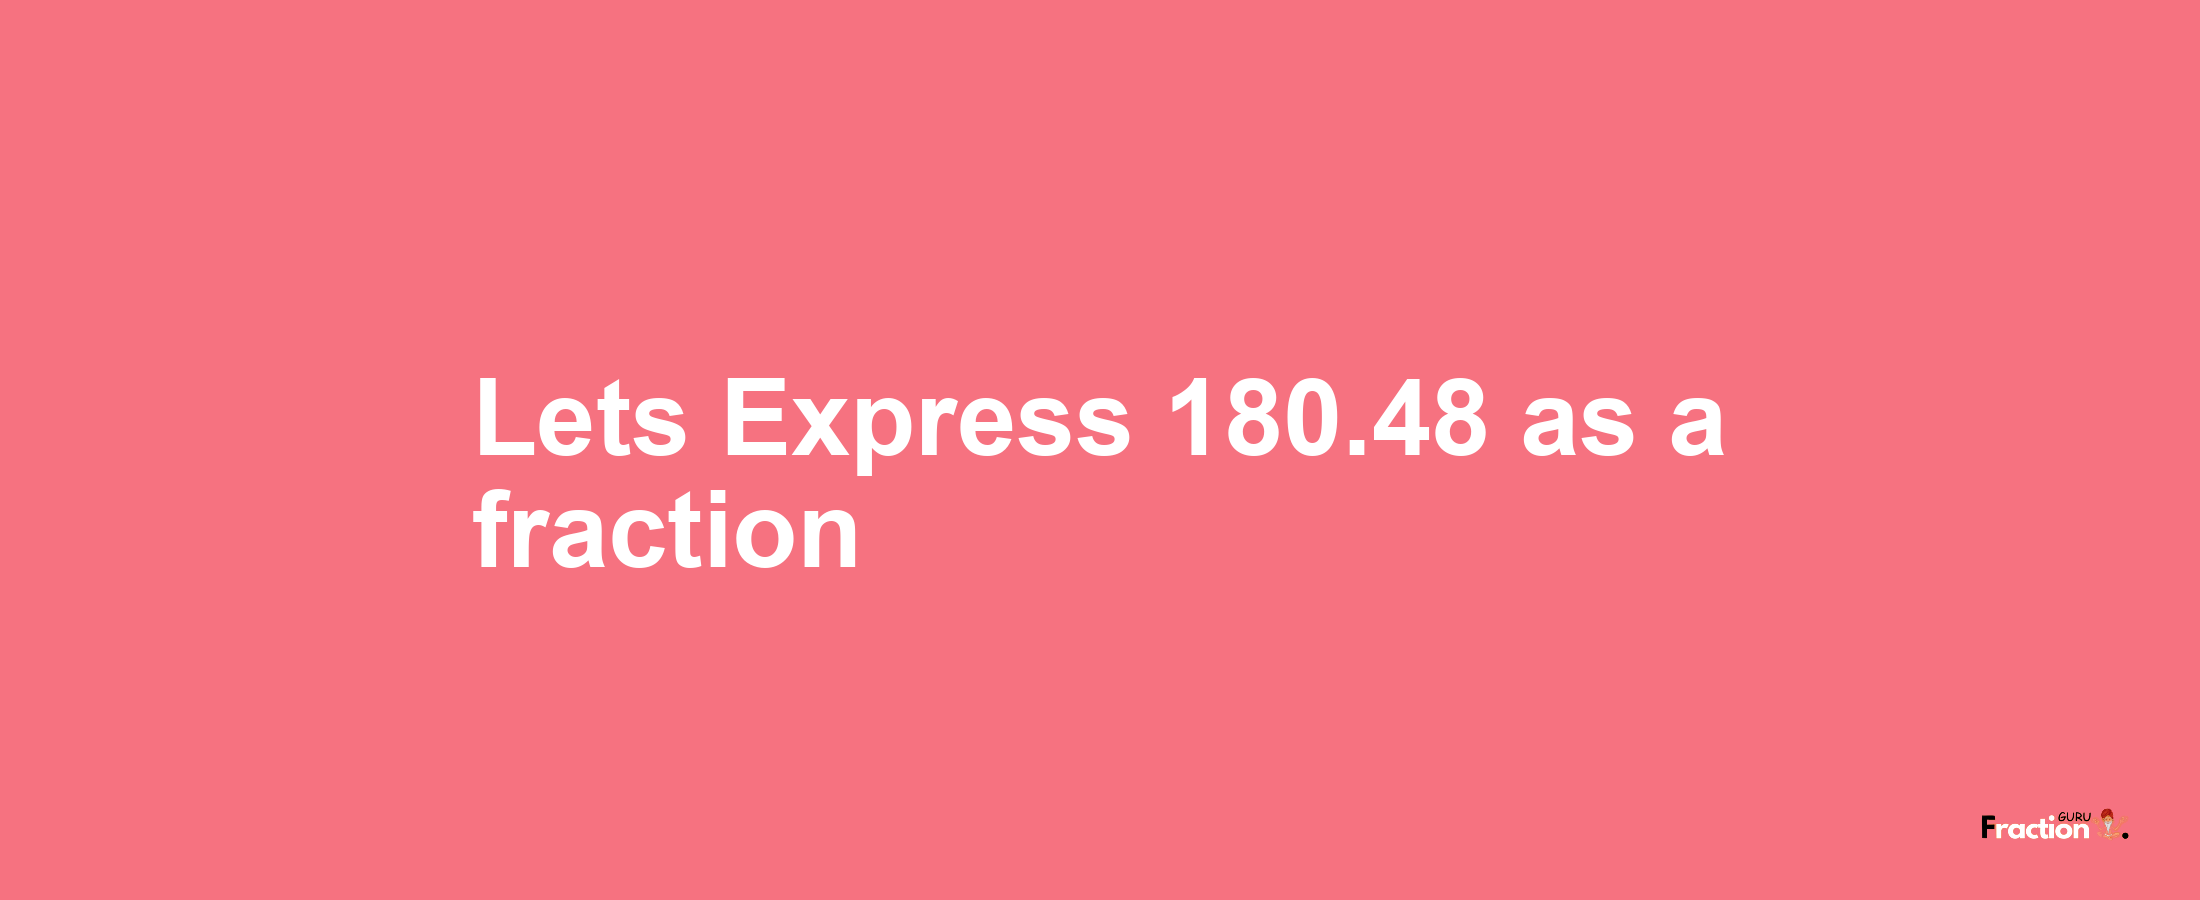 Lets Express 180.48 as afraction